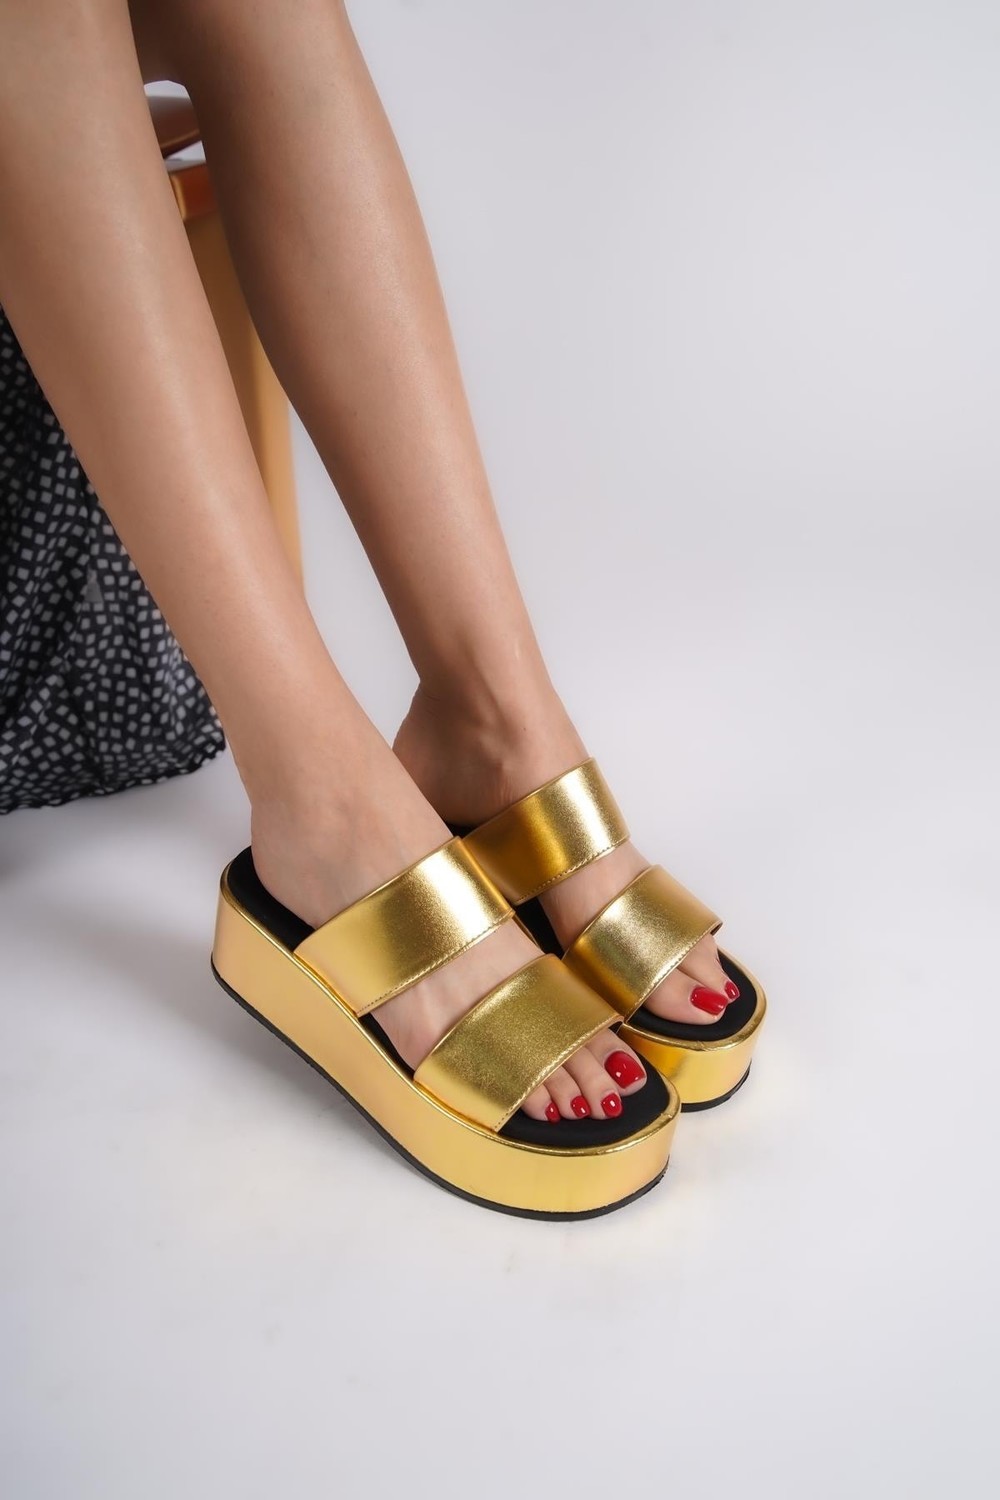 Capone Outfitters Mules - Gold - Block